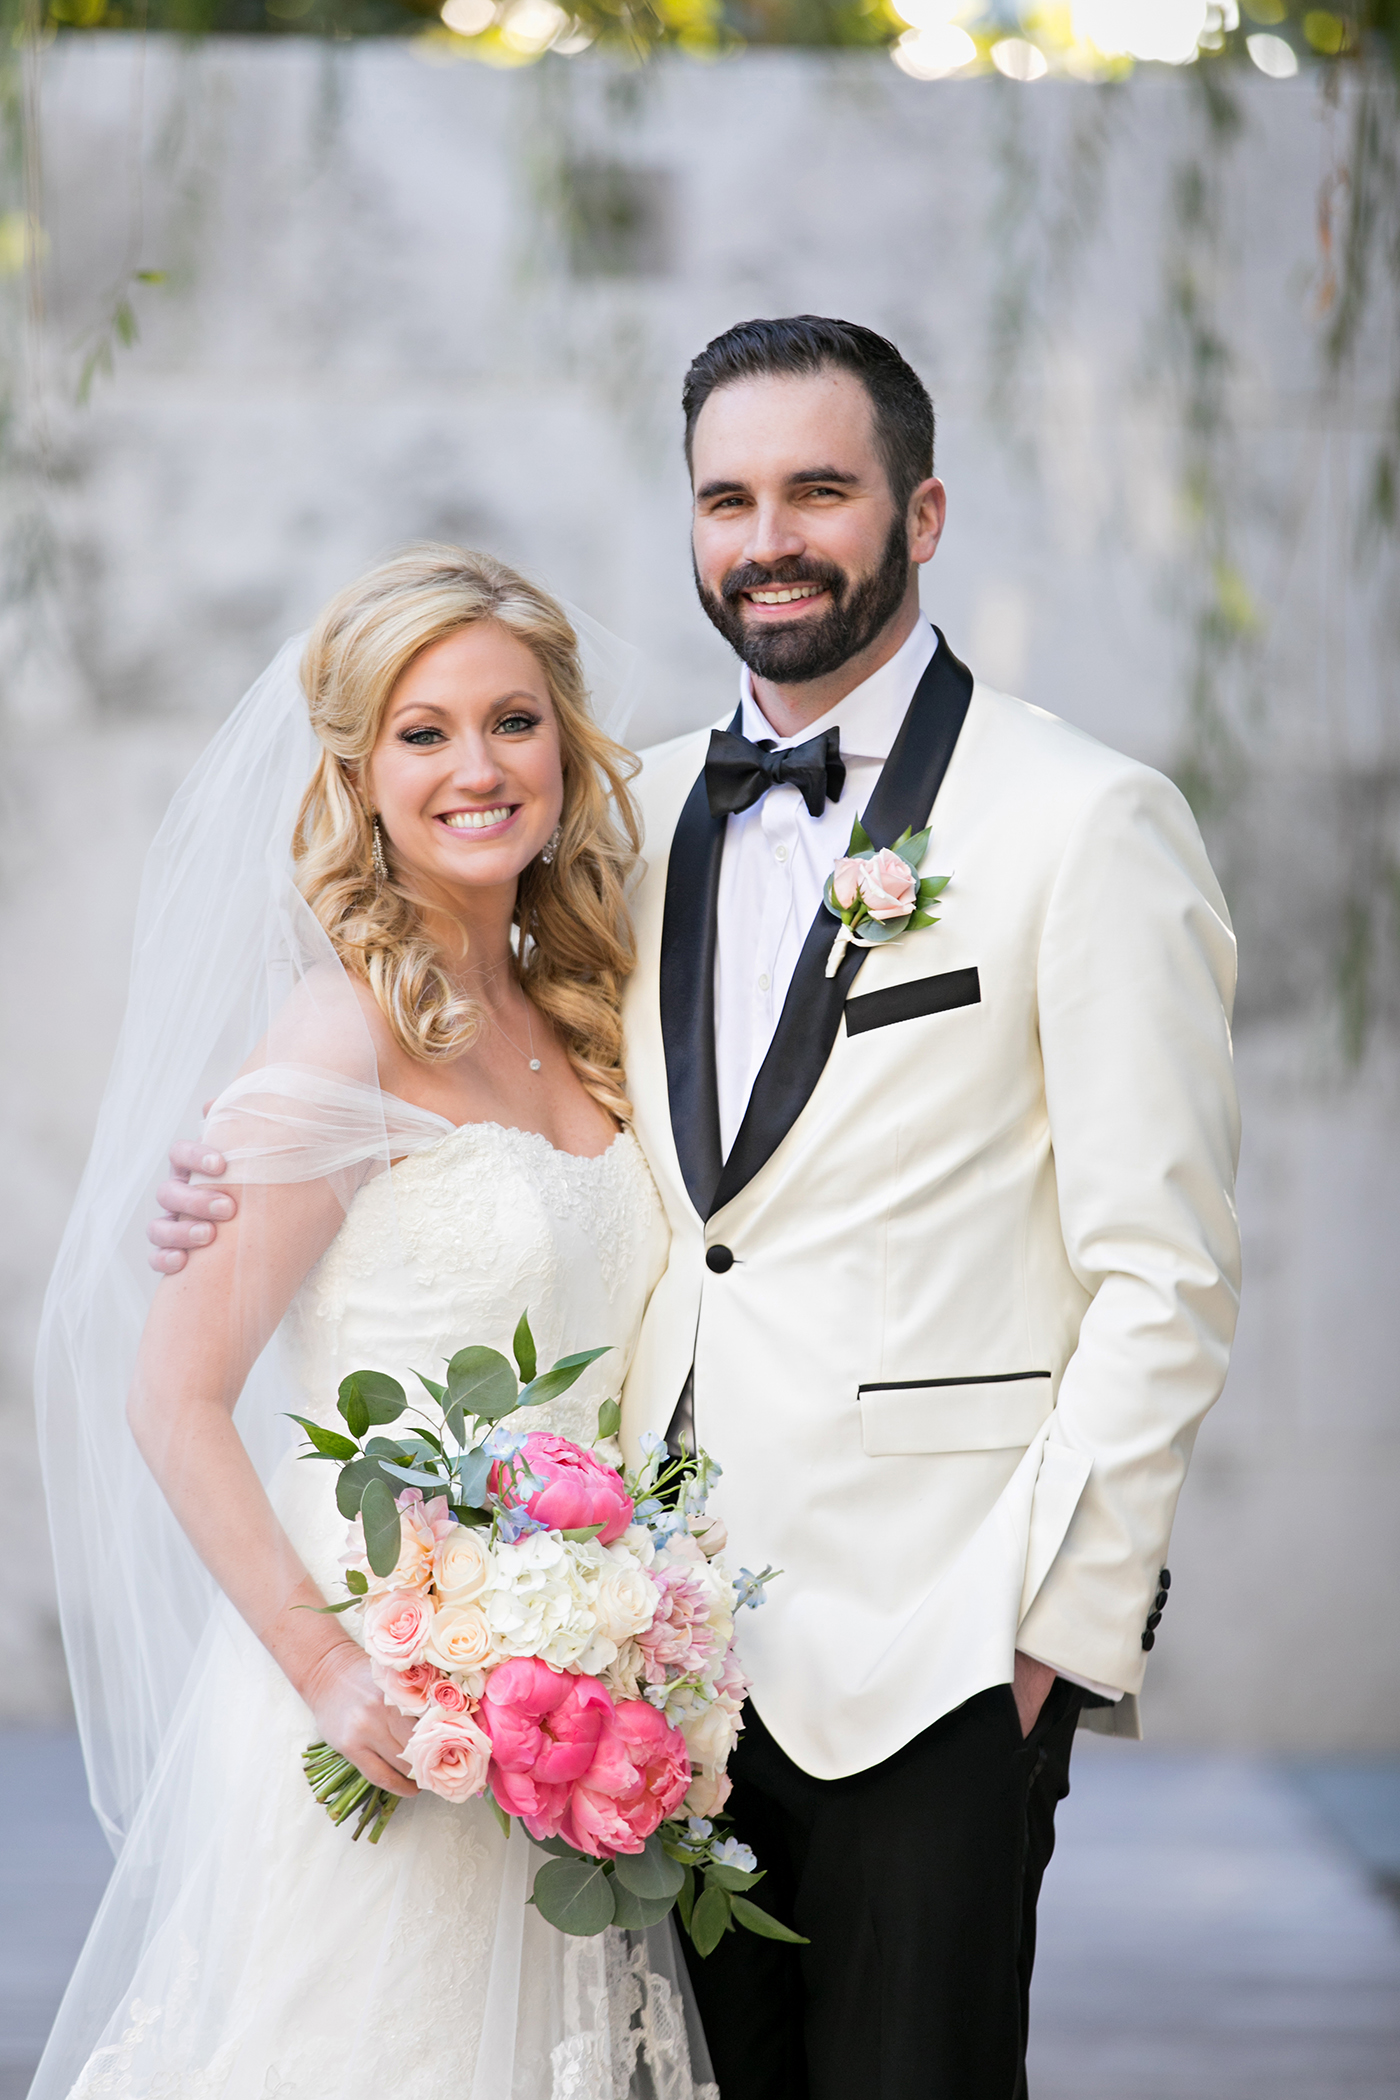 Wedding Planners in Dallas | A Stylish Soiree: Christine + Andrew